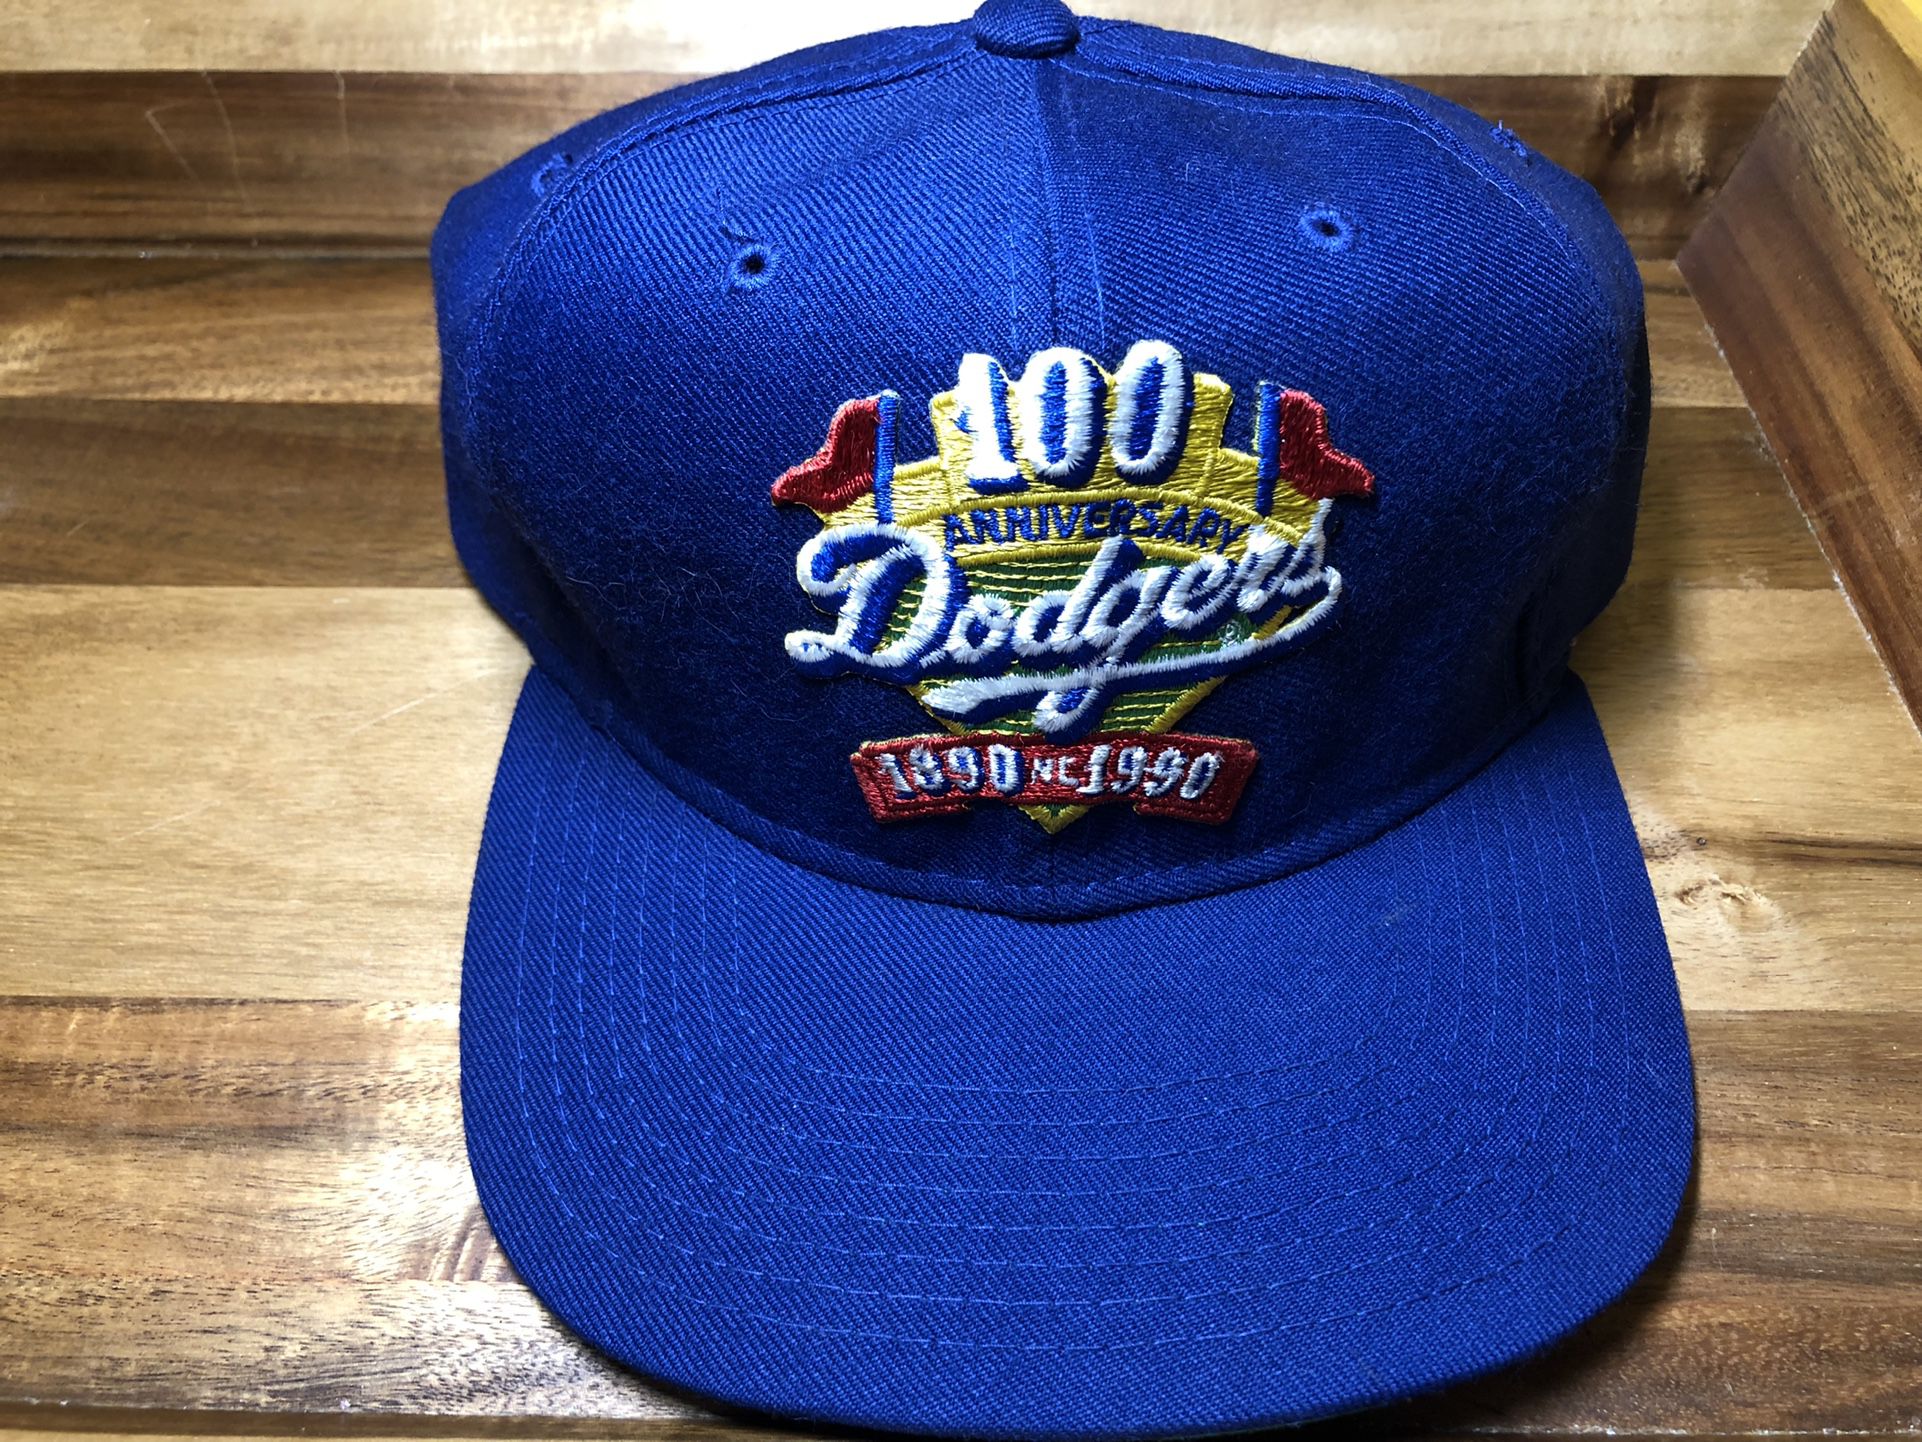 Vintage 100th Anniversary Dodgers Snapback Baseball Hat Rare In Great Shape  $80 for Sale in Los Angeles, CA - OfferUp